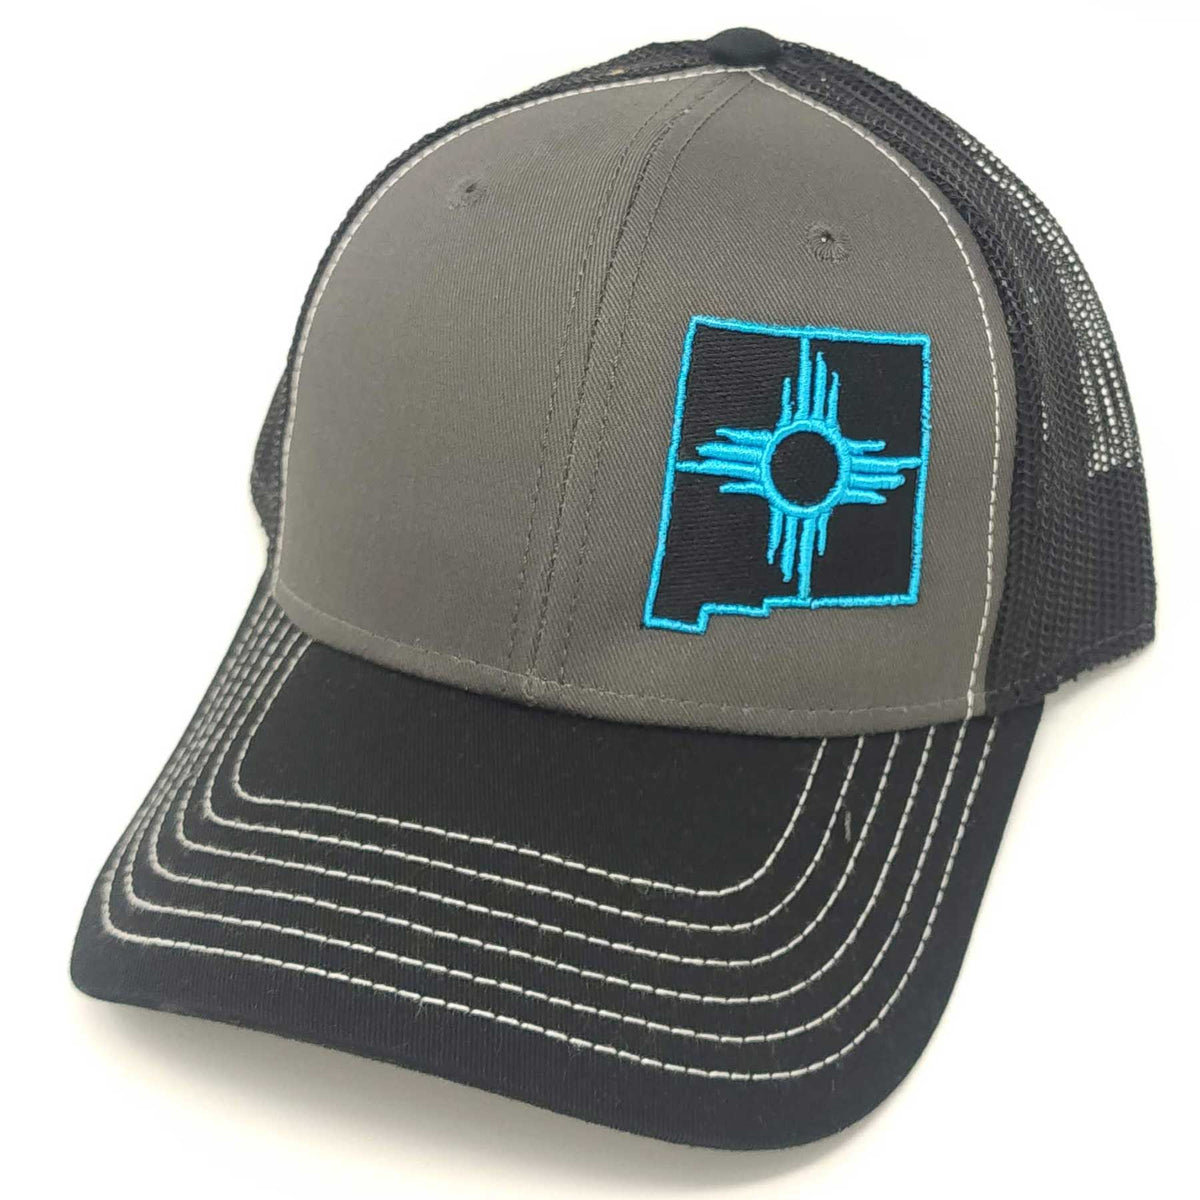 New Mexico Zia Embroidered Trucker Snapback